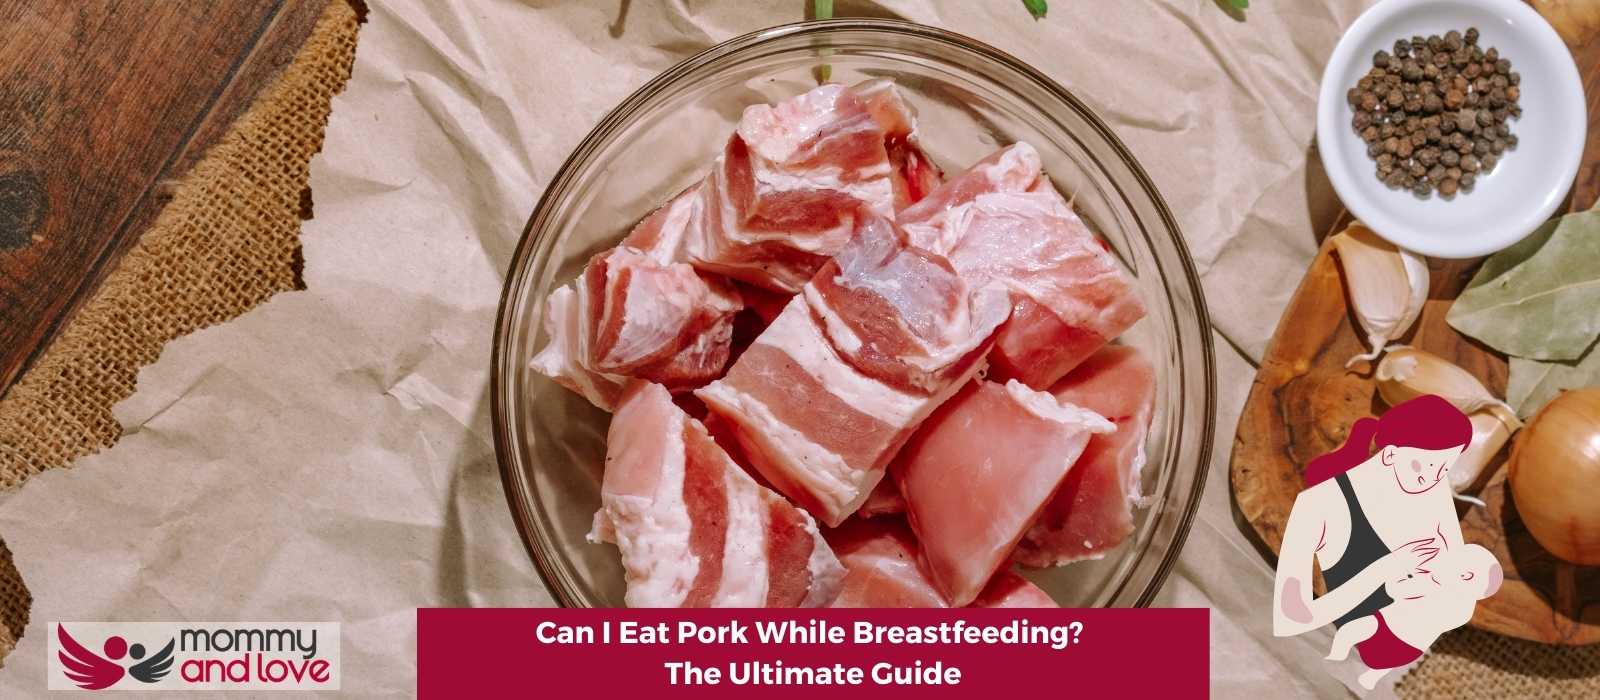 Can I Eat Pork While Breastfeeding The Ultimate Guide